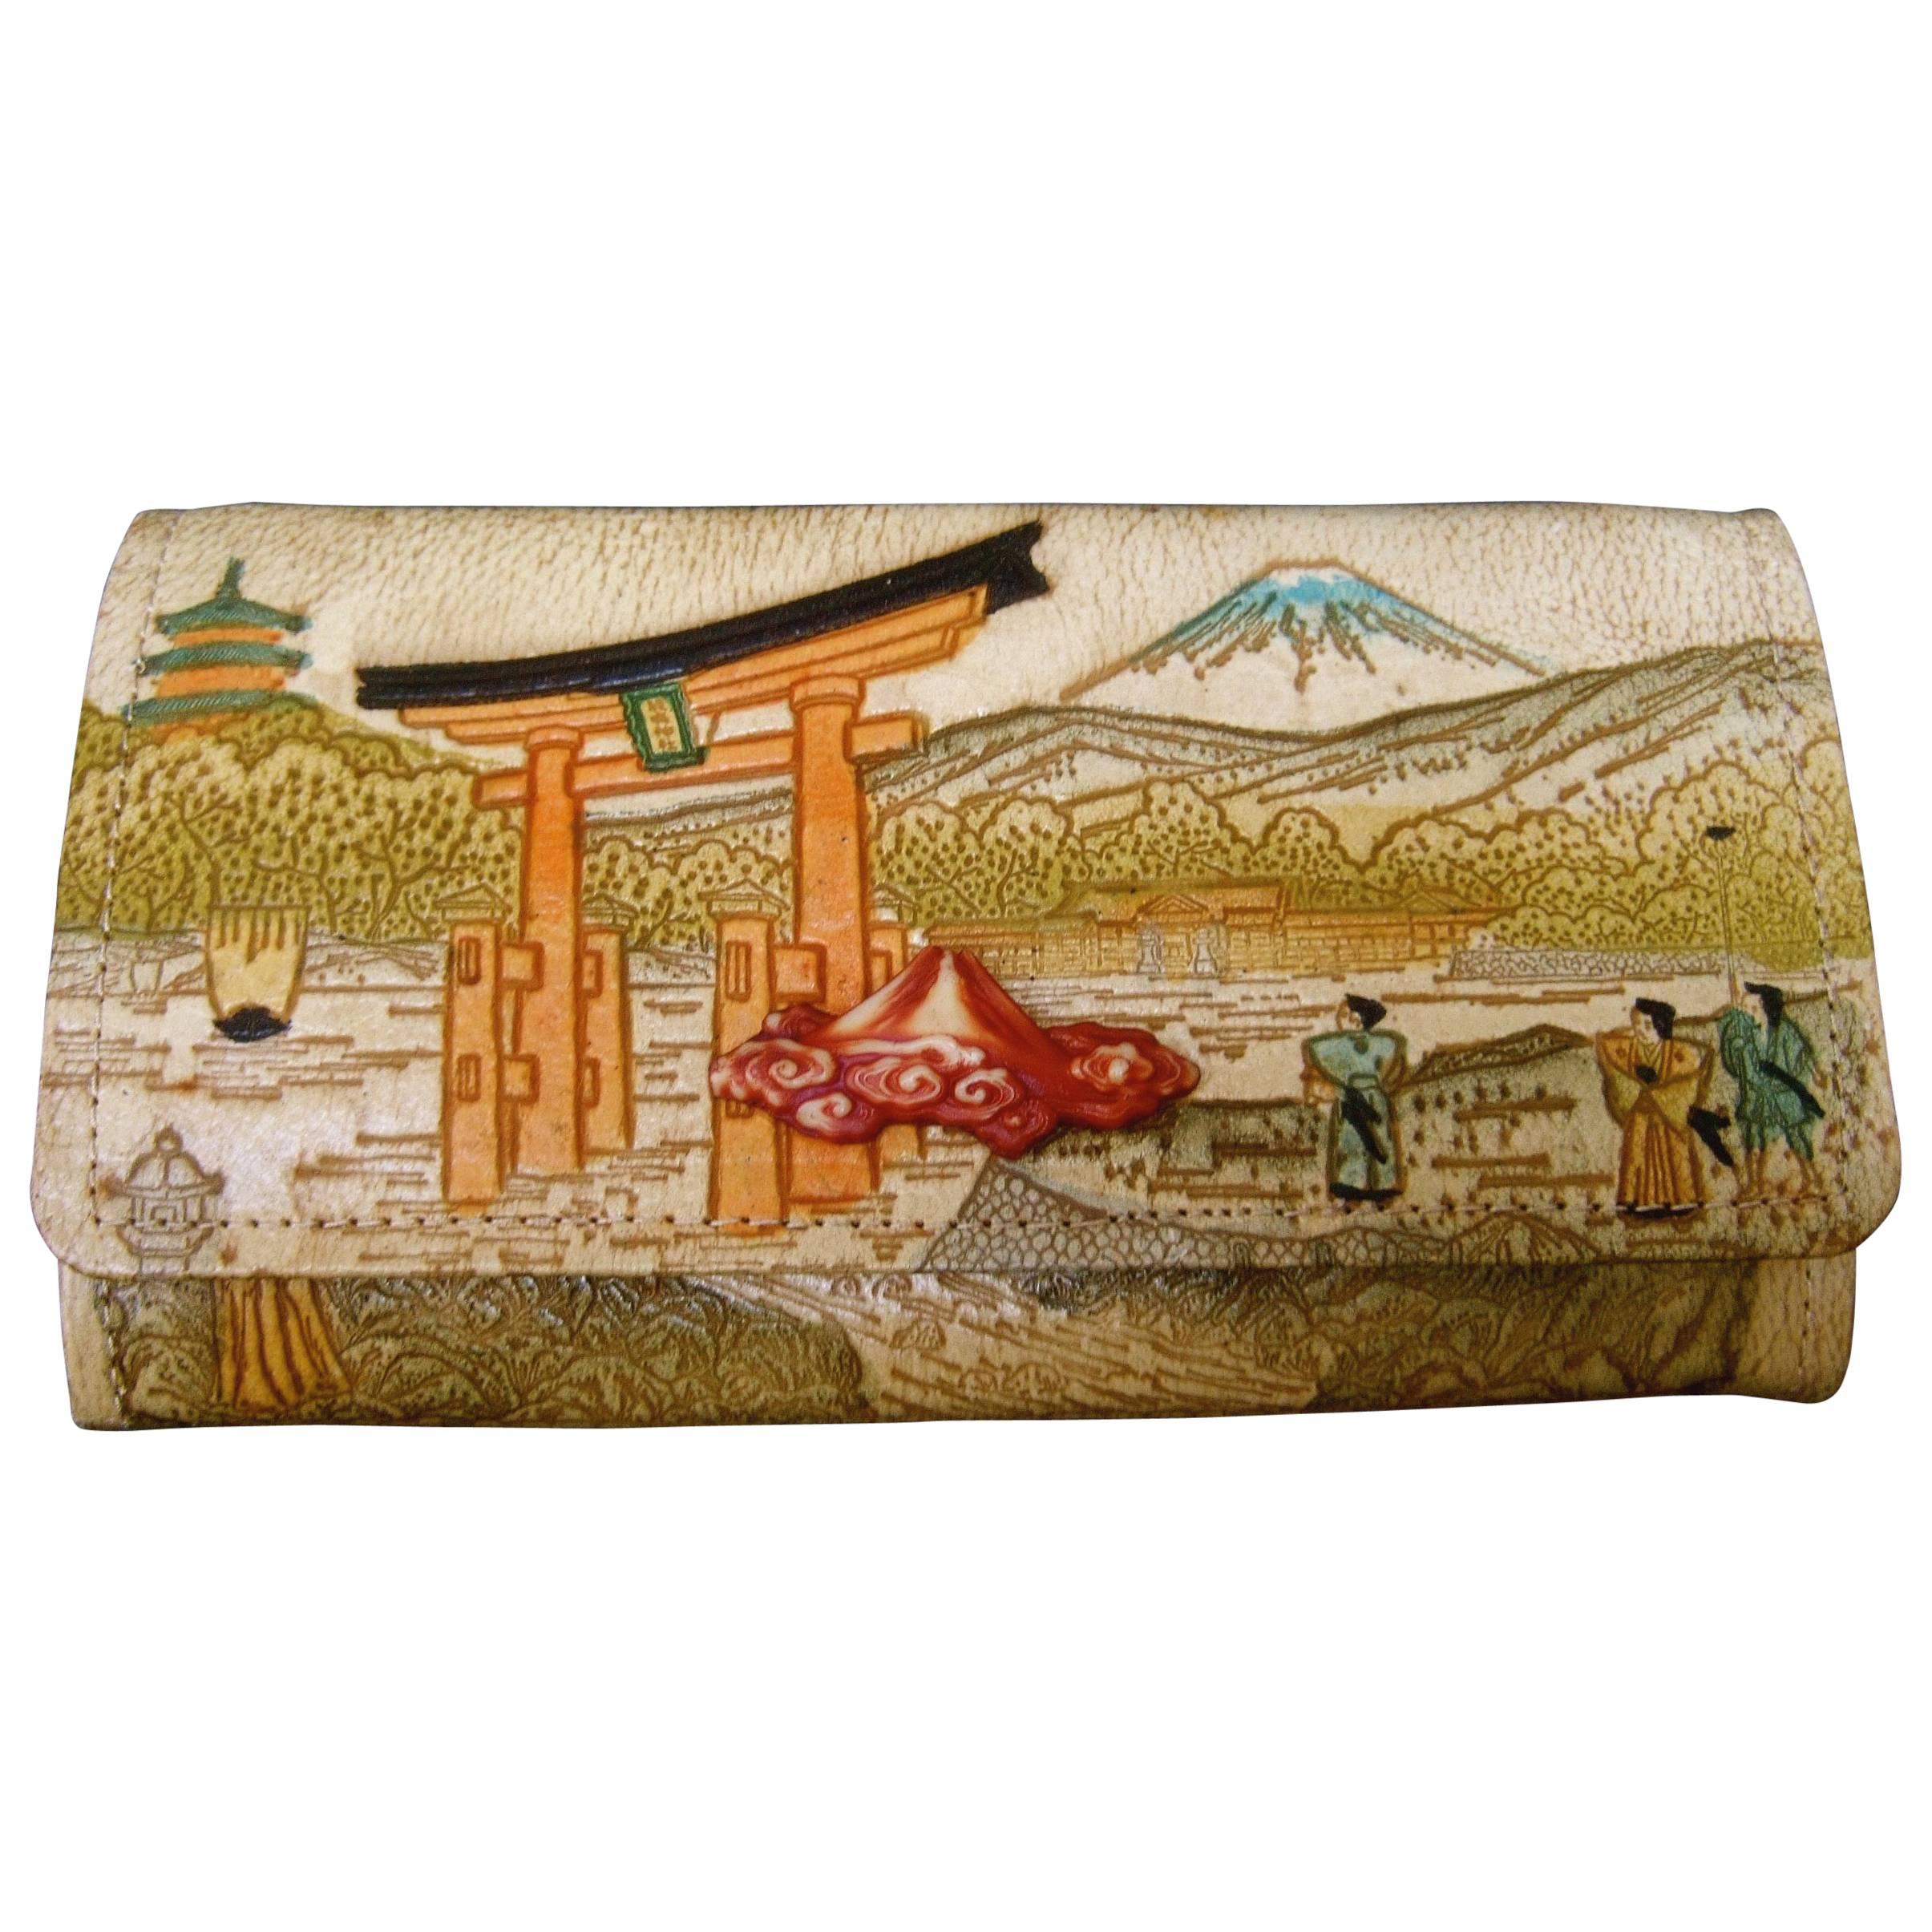 Exotic Japanese Tooled Leather Clutch / Wallet ca 1960